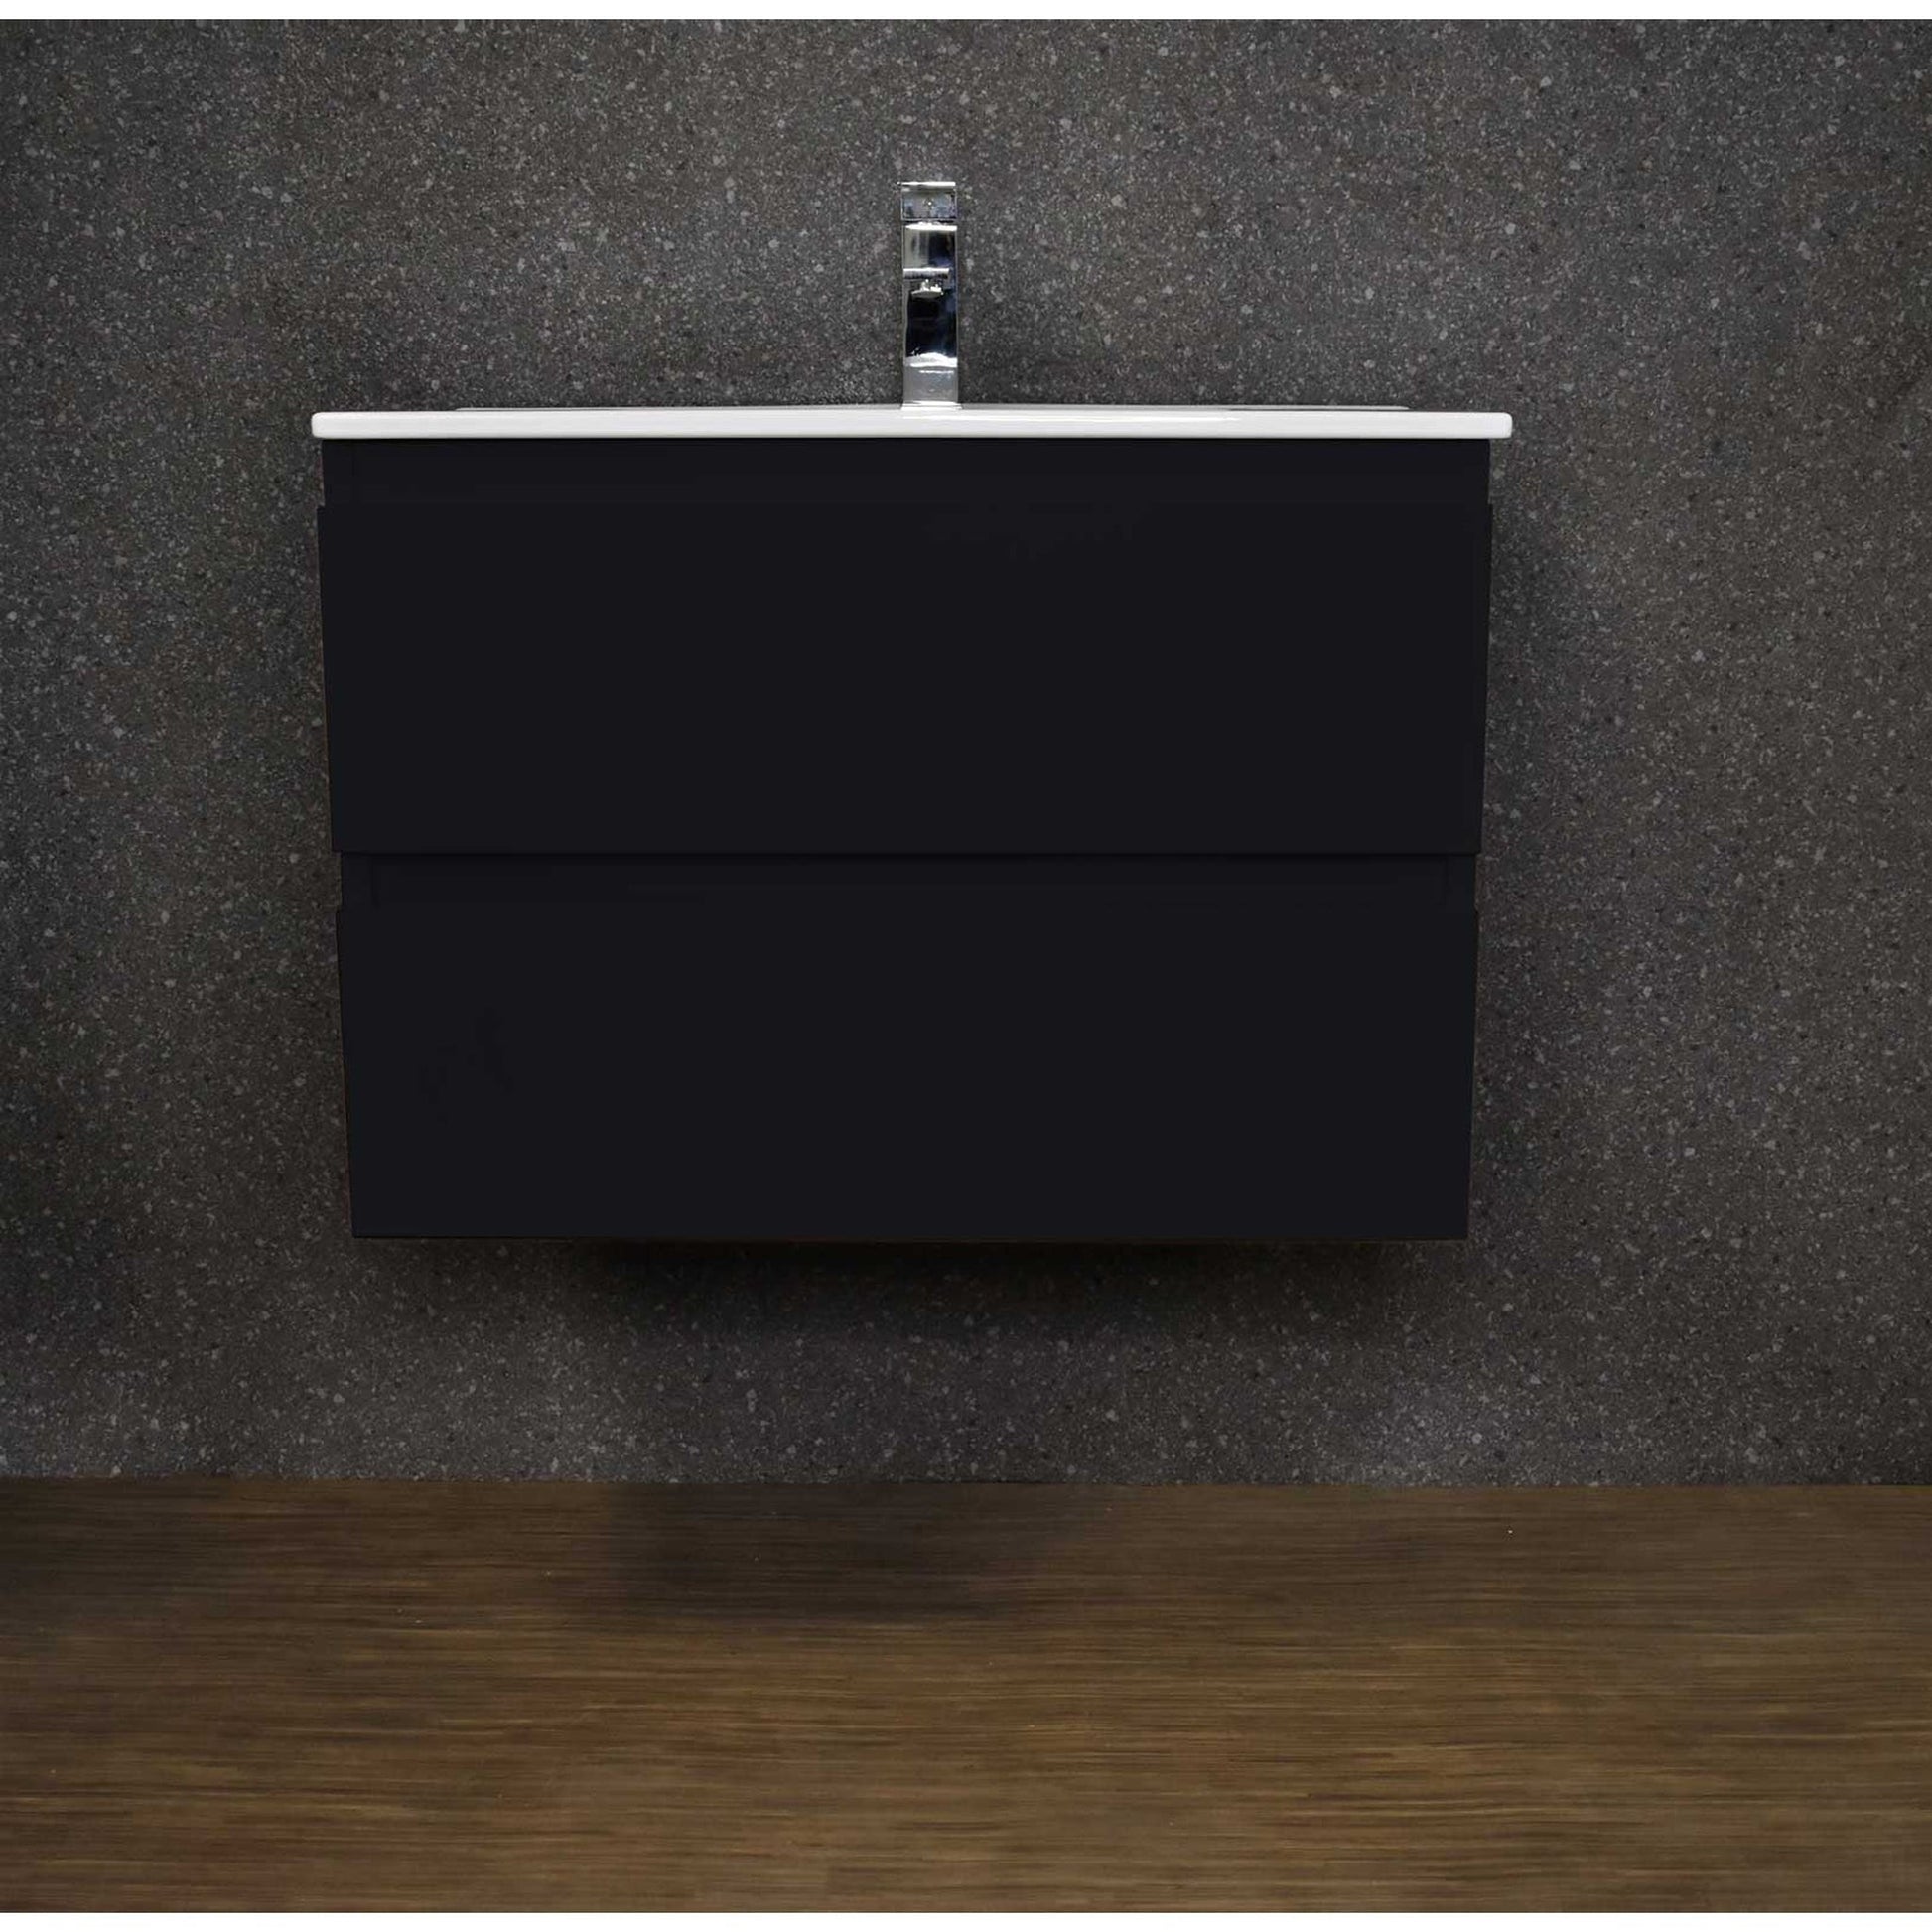 Volpa USA Salt 36" x 18" Black Wall-Mounted Floating Bathroom Vanity With Drawers, Integrated Porcelain Ceramic Top and Integrated Ceramic Sink